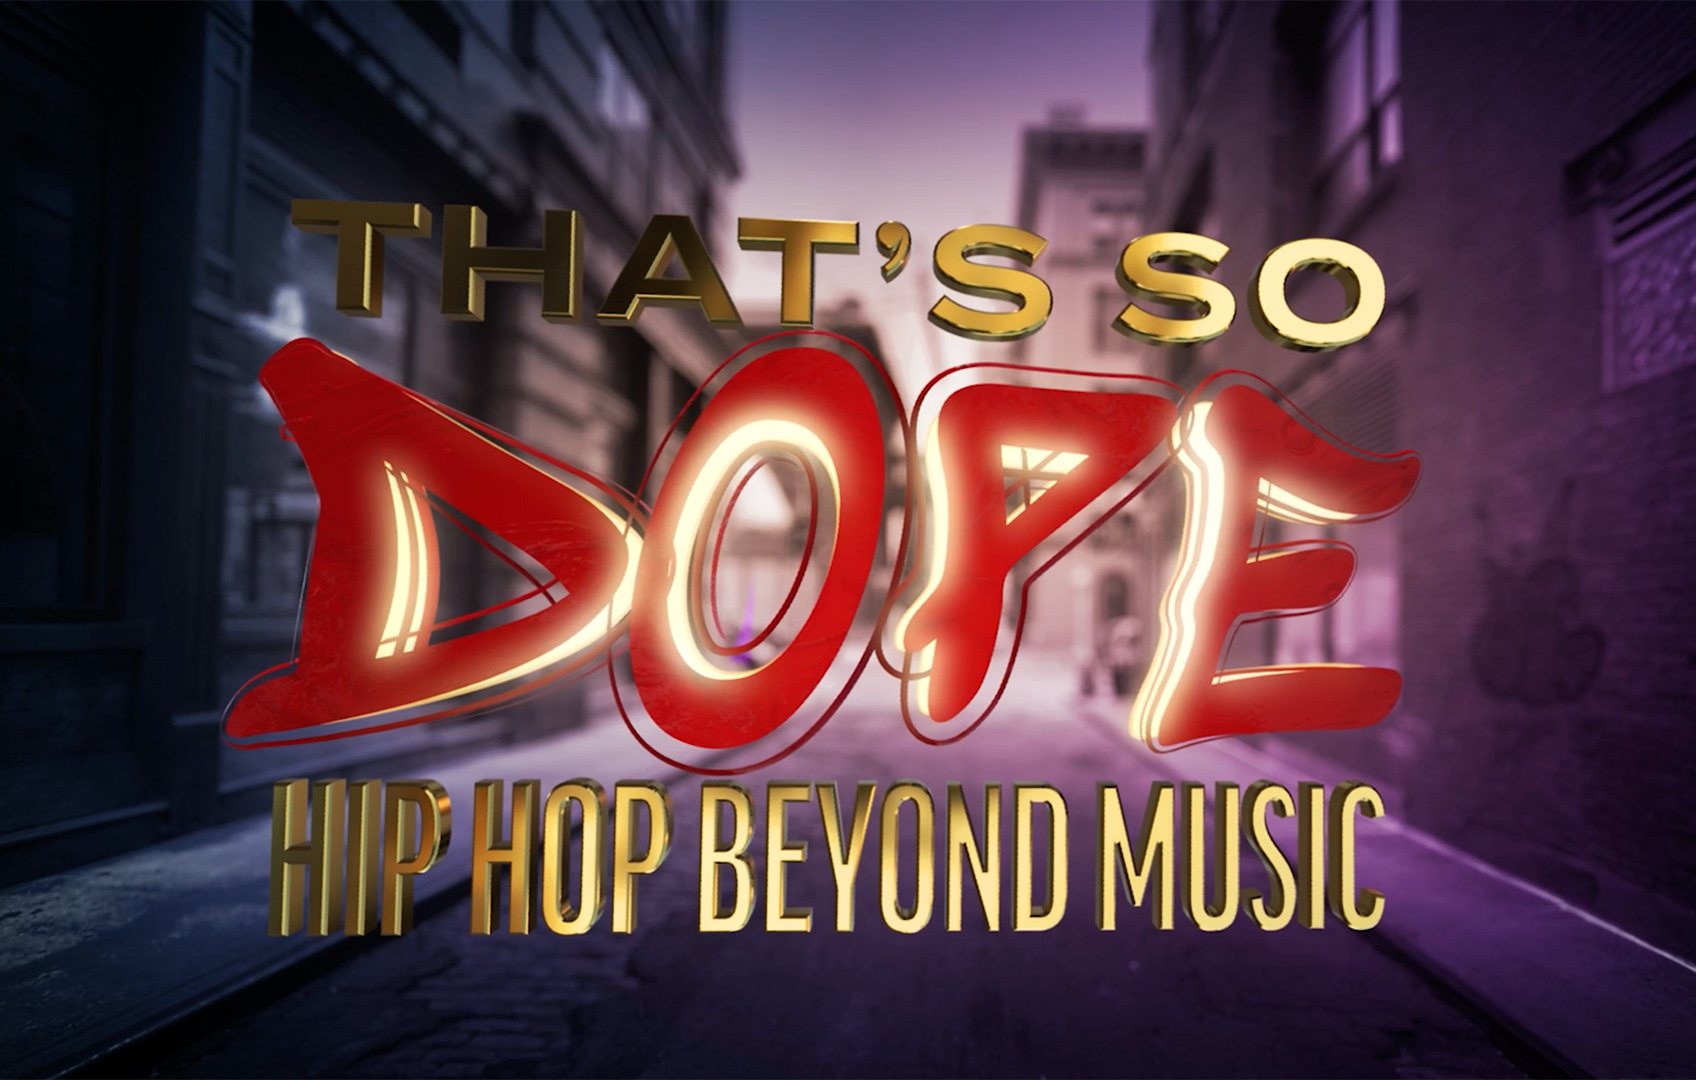 Photo of That's So Dope, Hip Hop Beyond Music logo
                                           